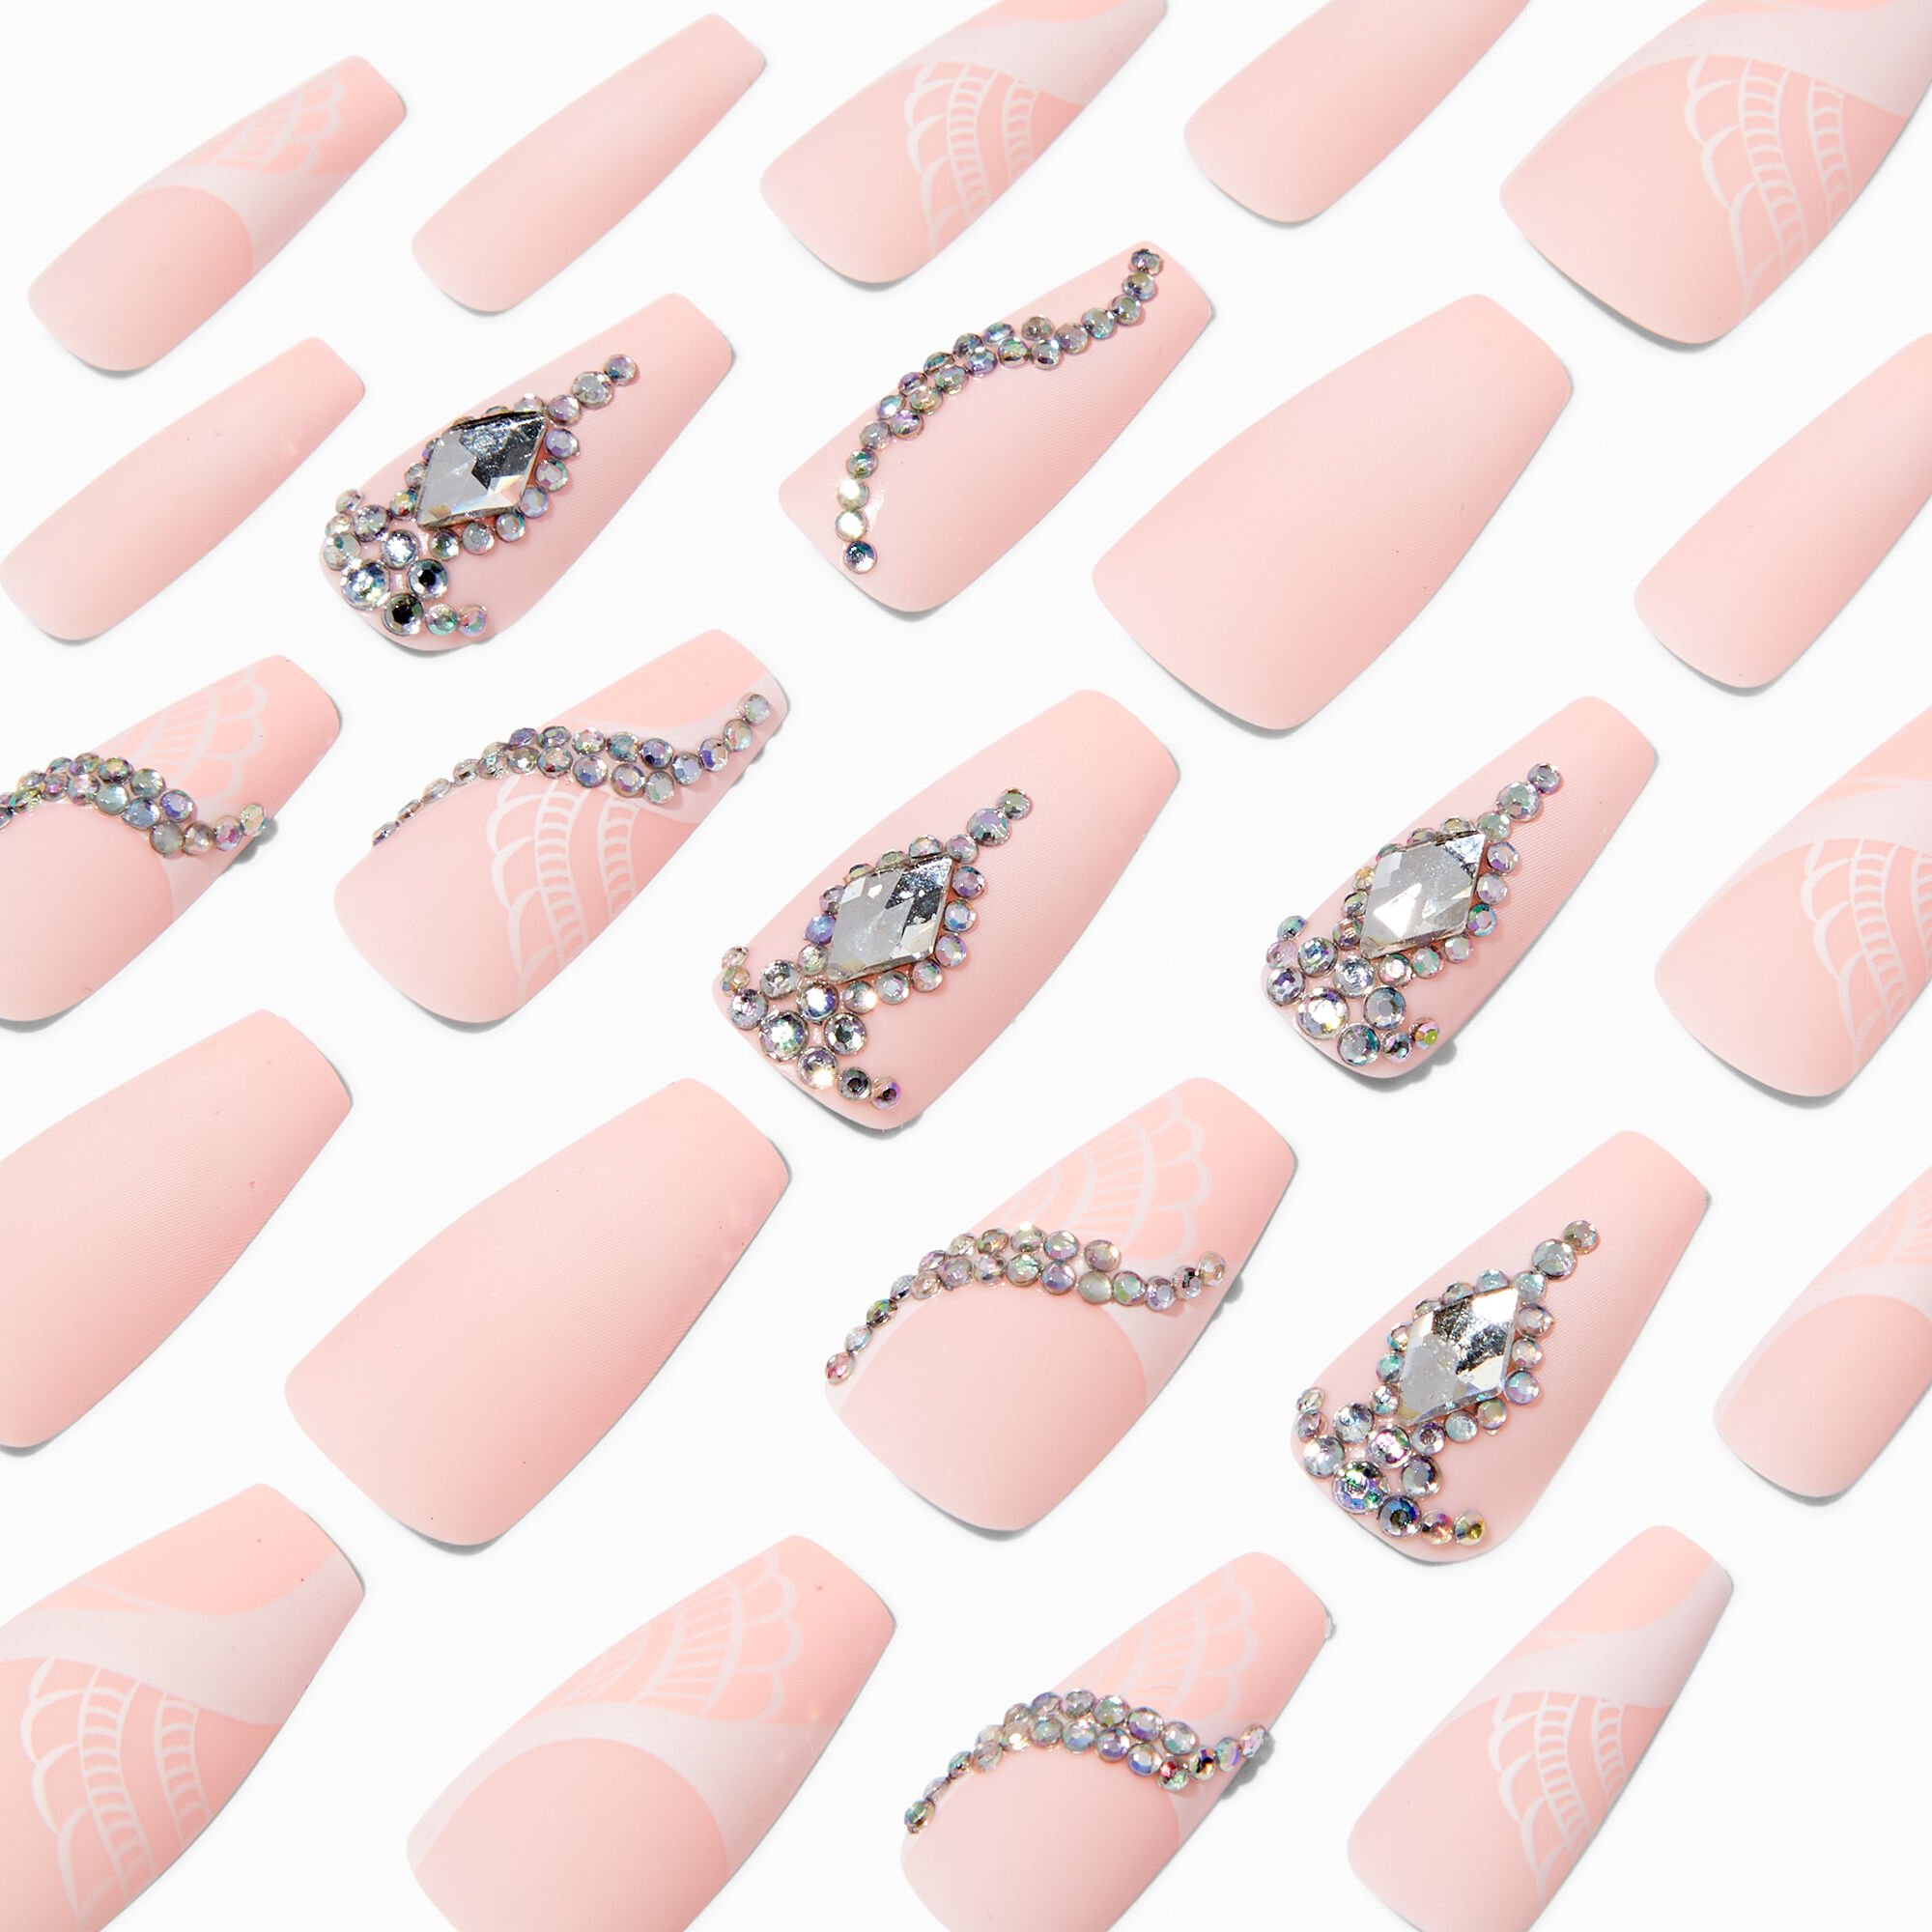 View Claires Nude Blush Bling Squareletto Press On Vegan Faux Nail Set 24 Pack information